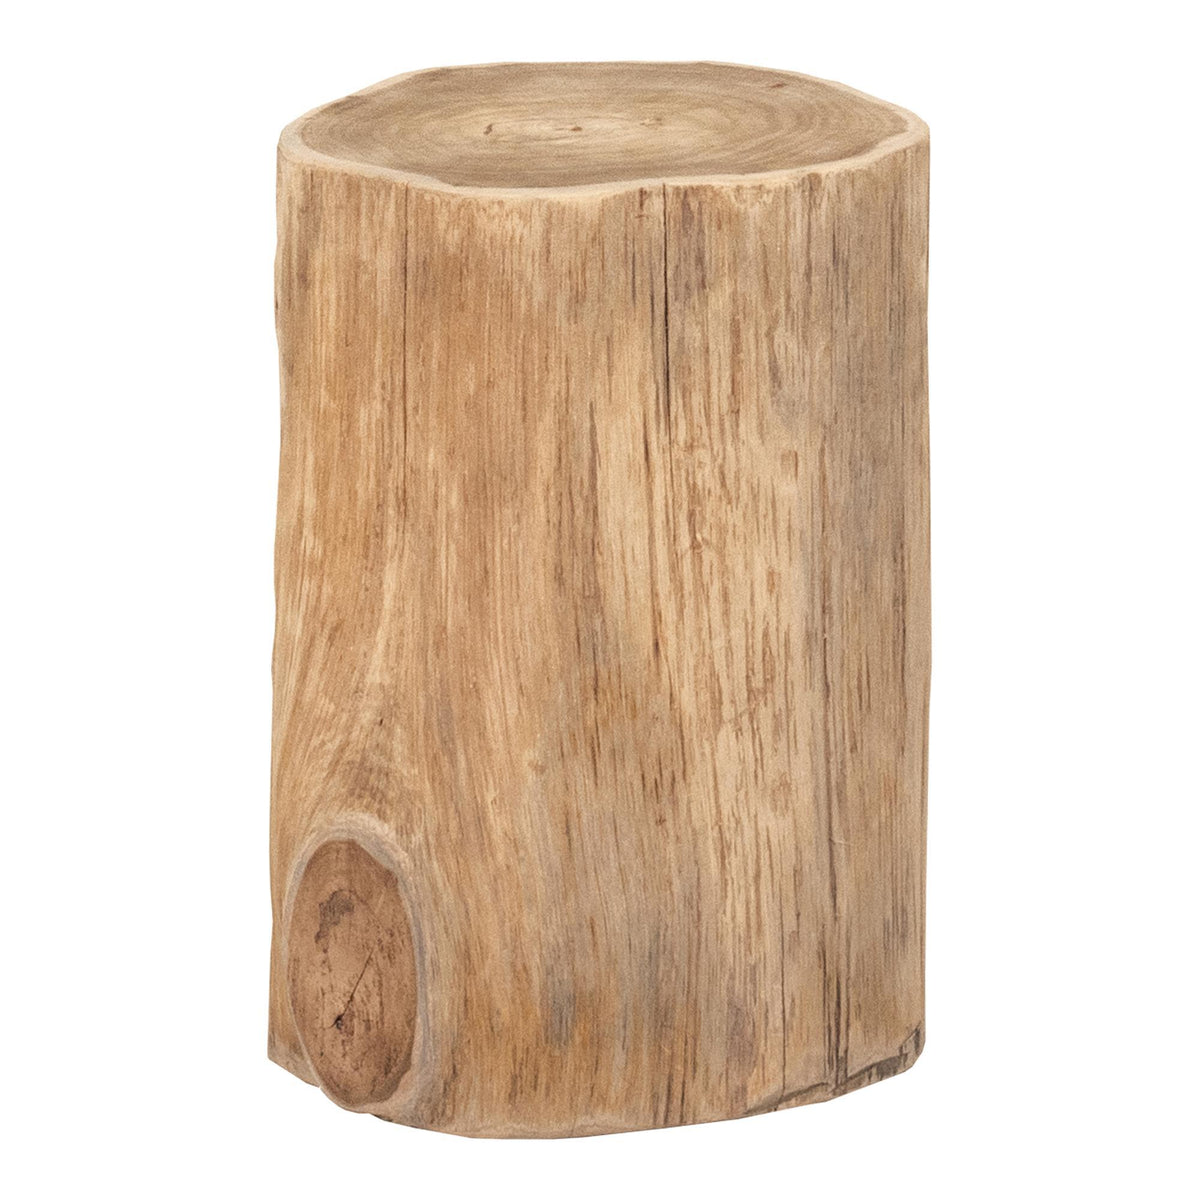 Moe's Home Collection Attis Accent Table  Natural - EI-1069-24